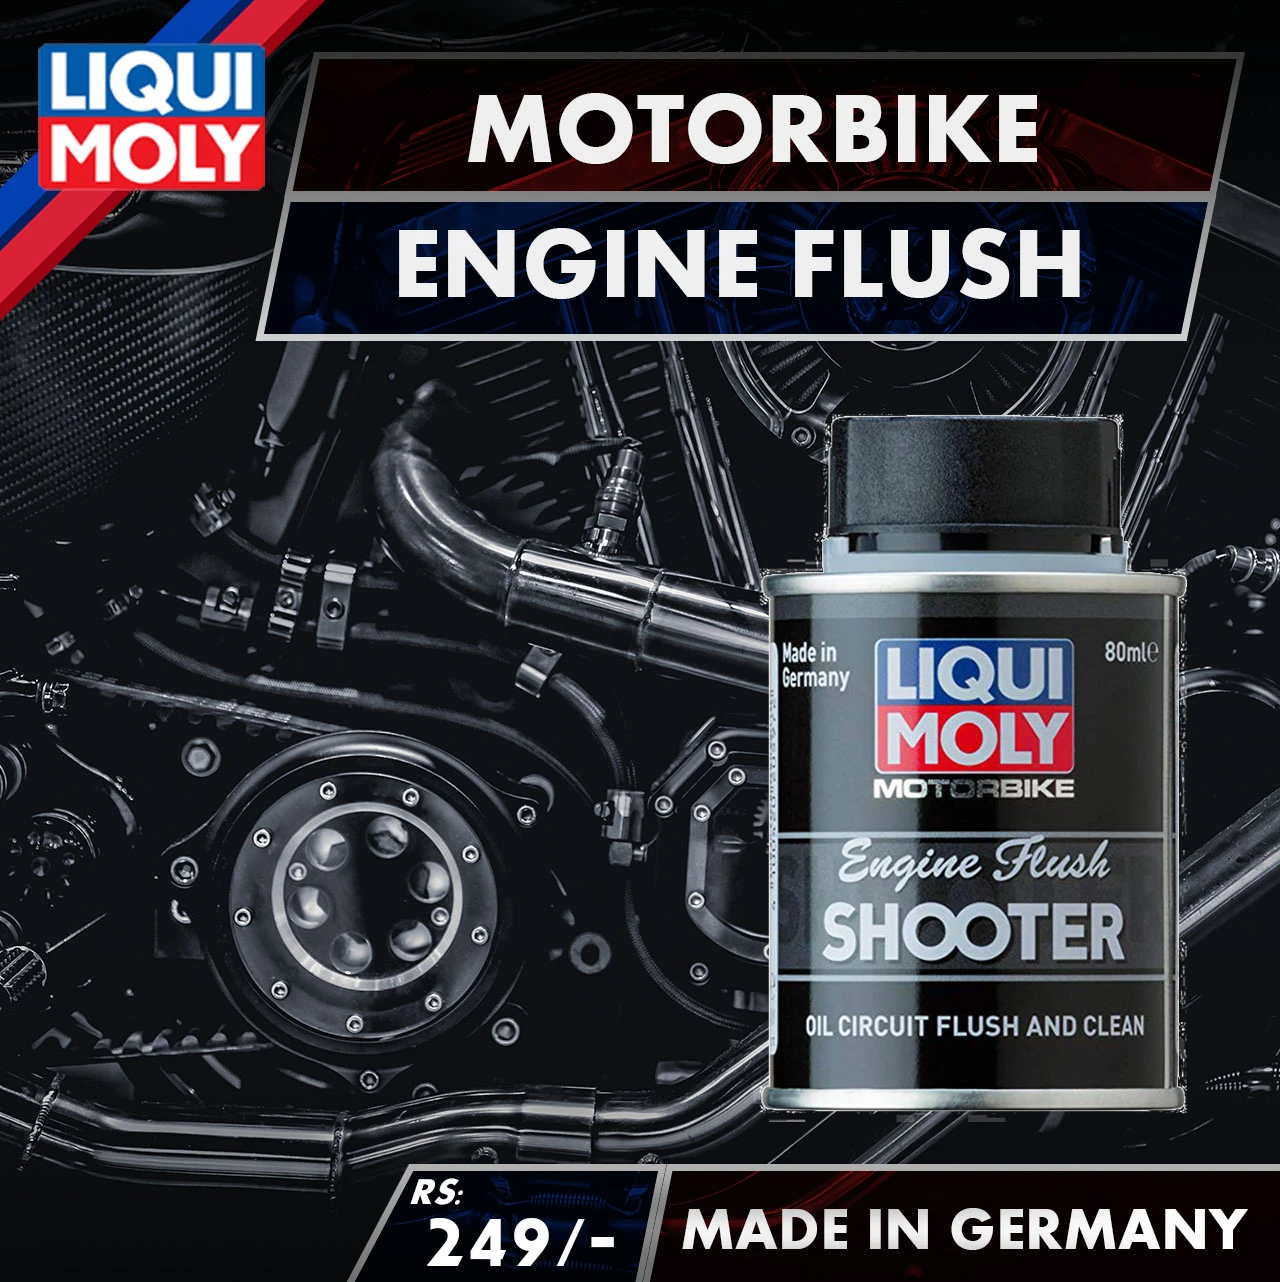 Buy Liqui Moly Motorcycle Engine Flush 80ml Online at Best Price